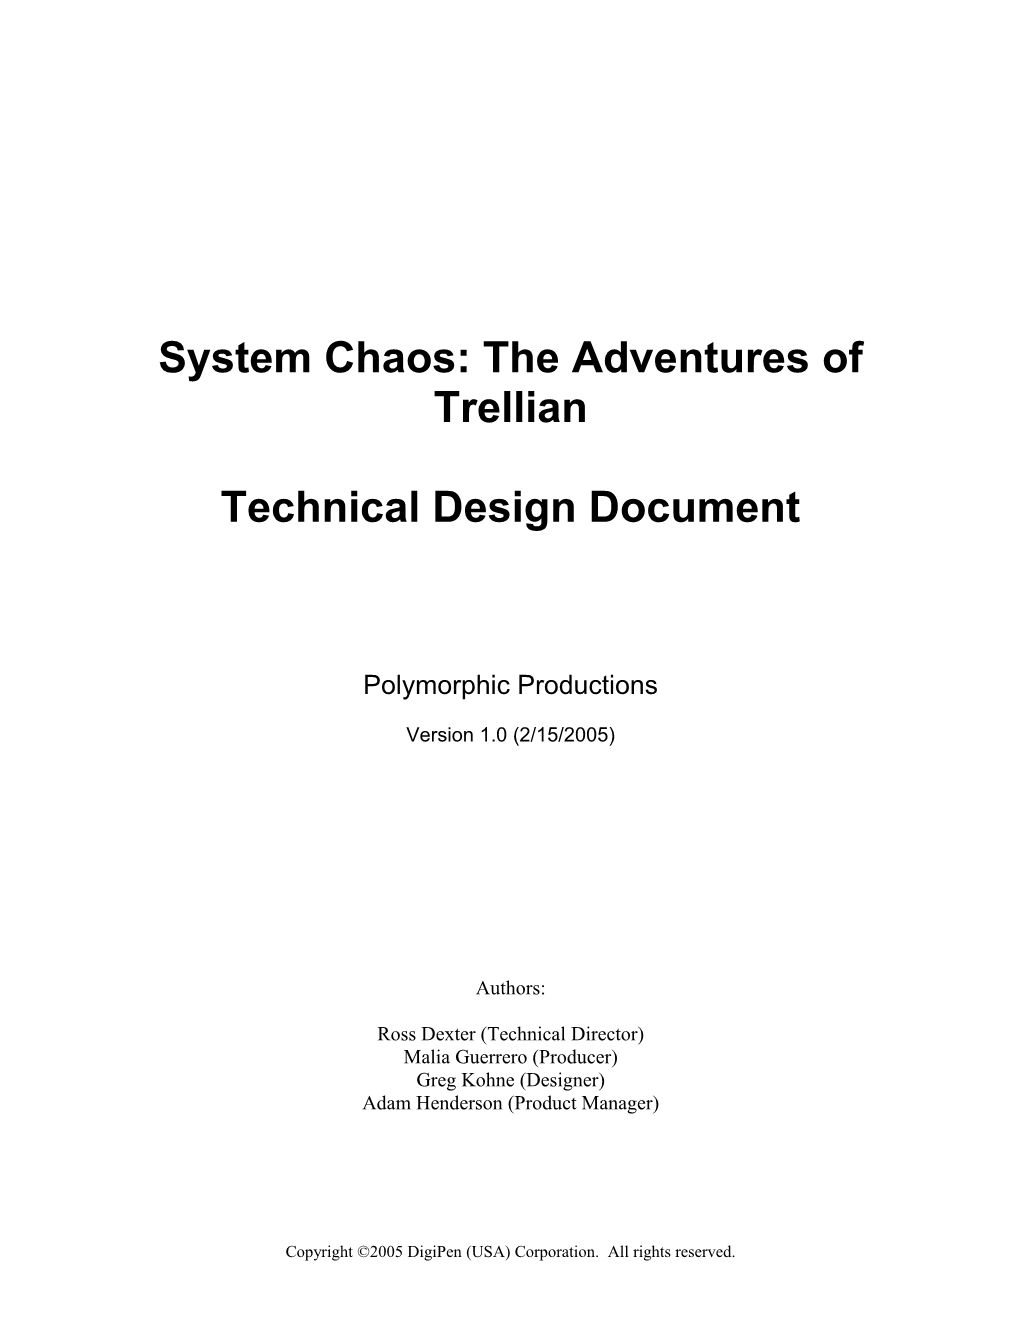 System Chaos Technical Design Document GAM300